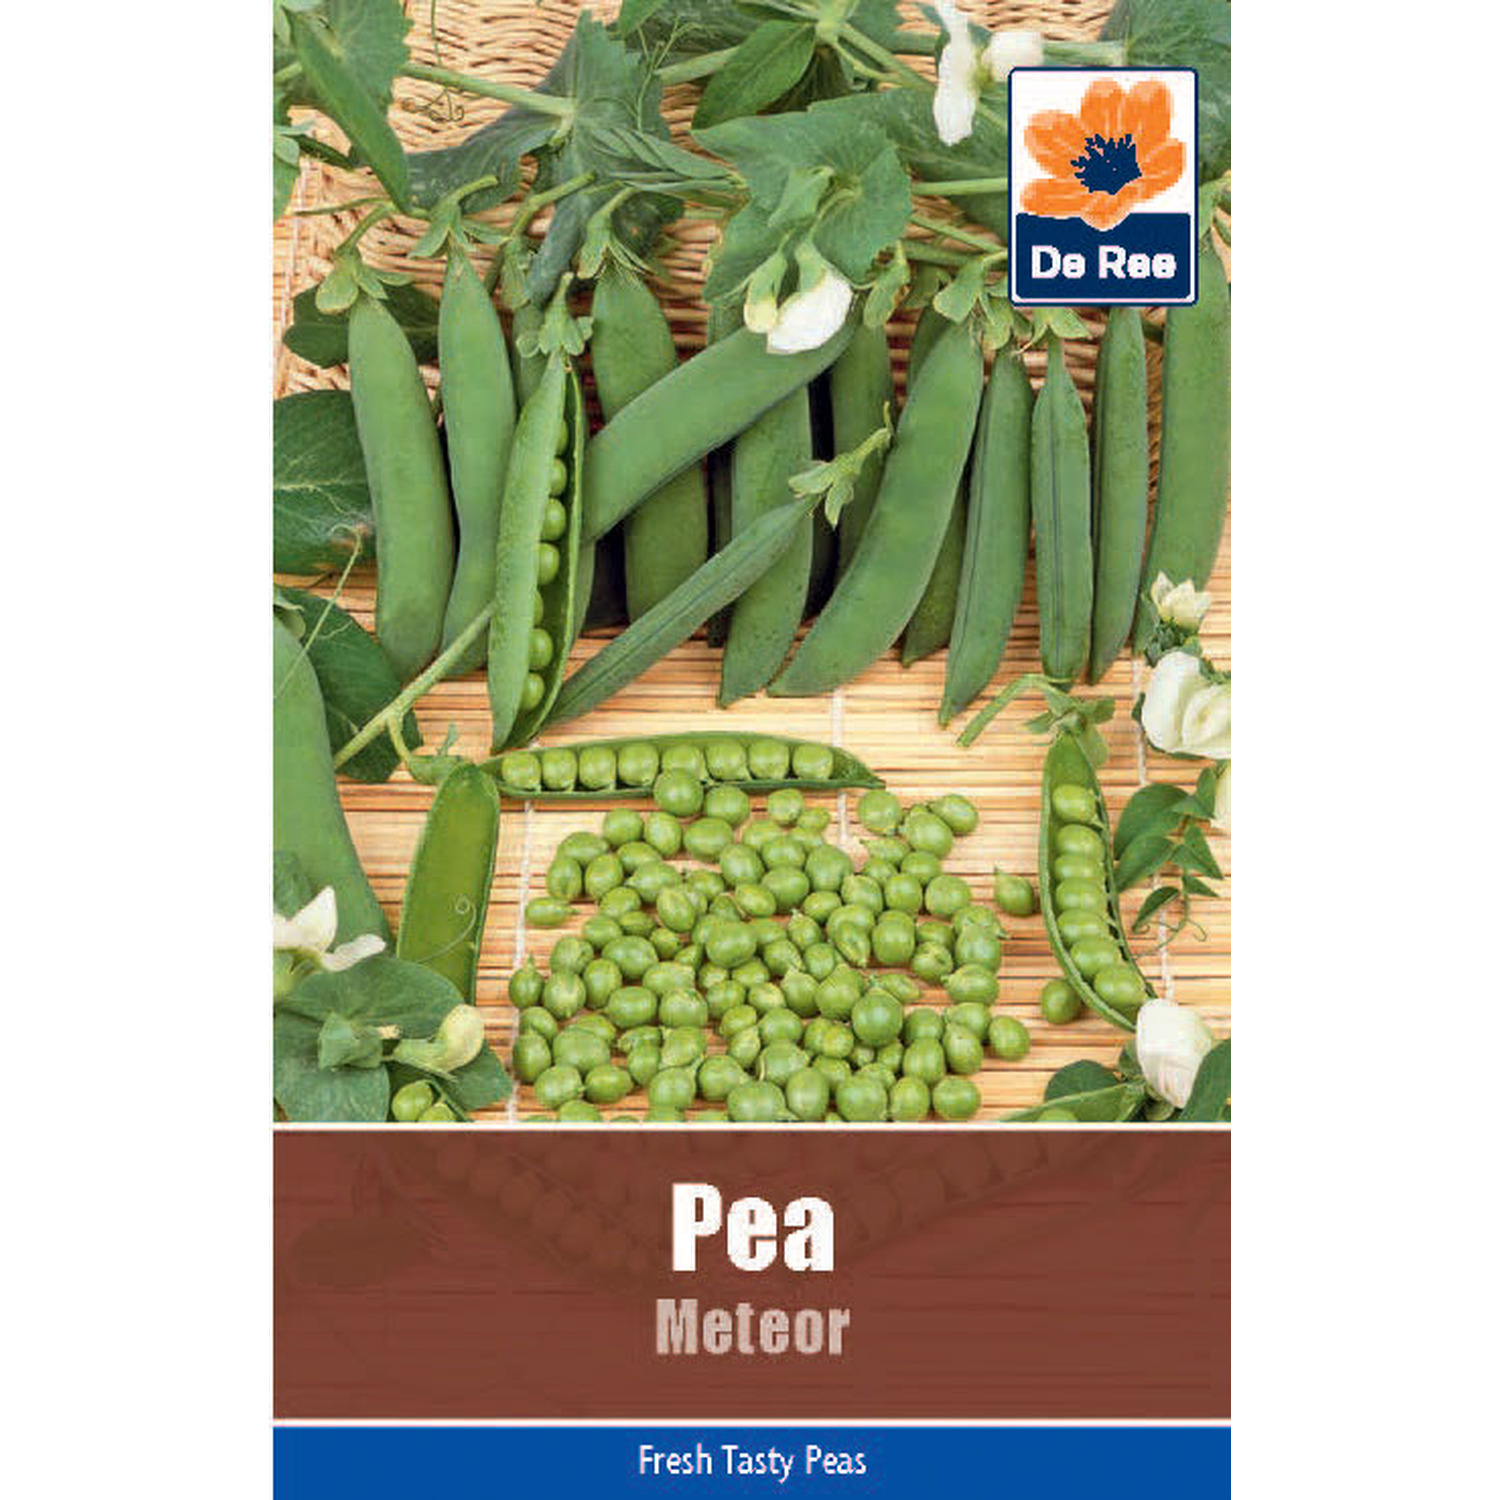 Pea Meteor Green Shaft Seed Packet Image